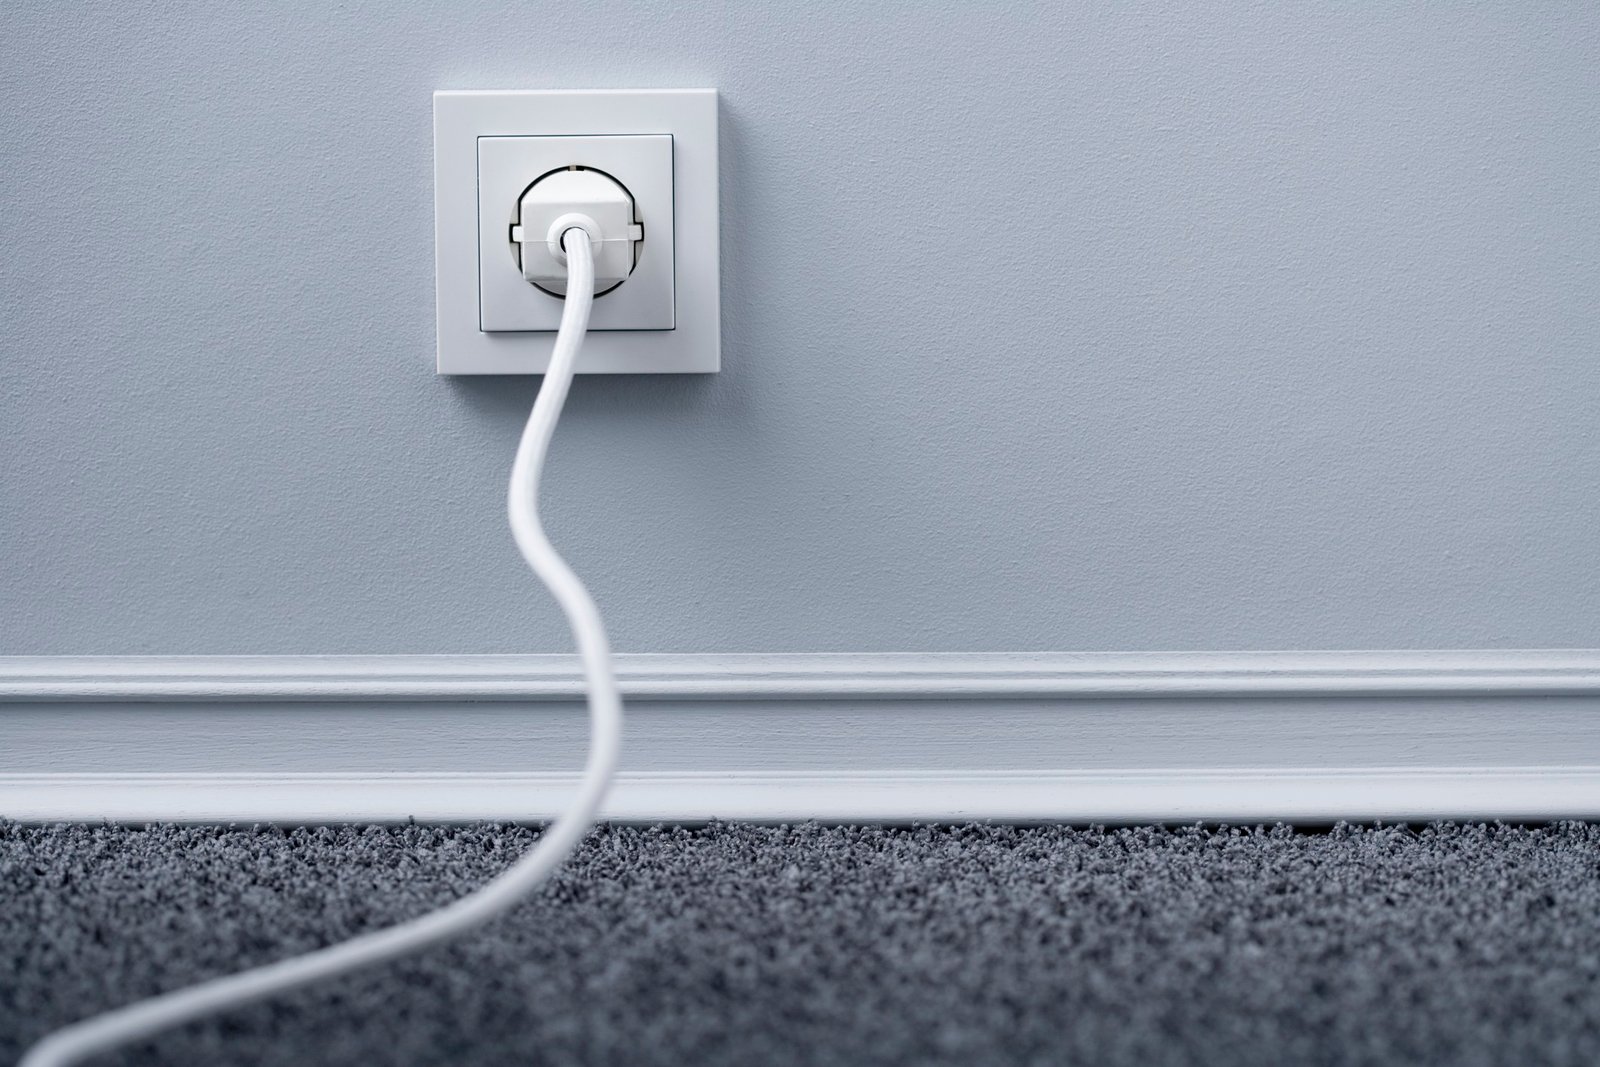 Saving electricity is very easy with sockets that can be